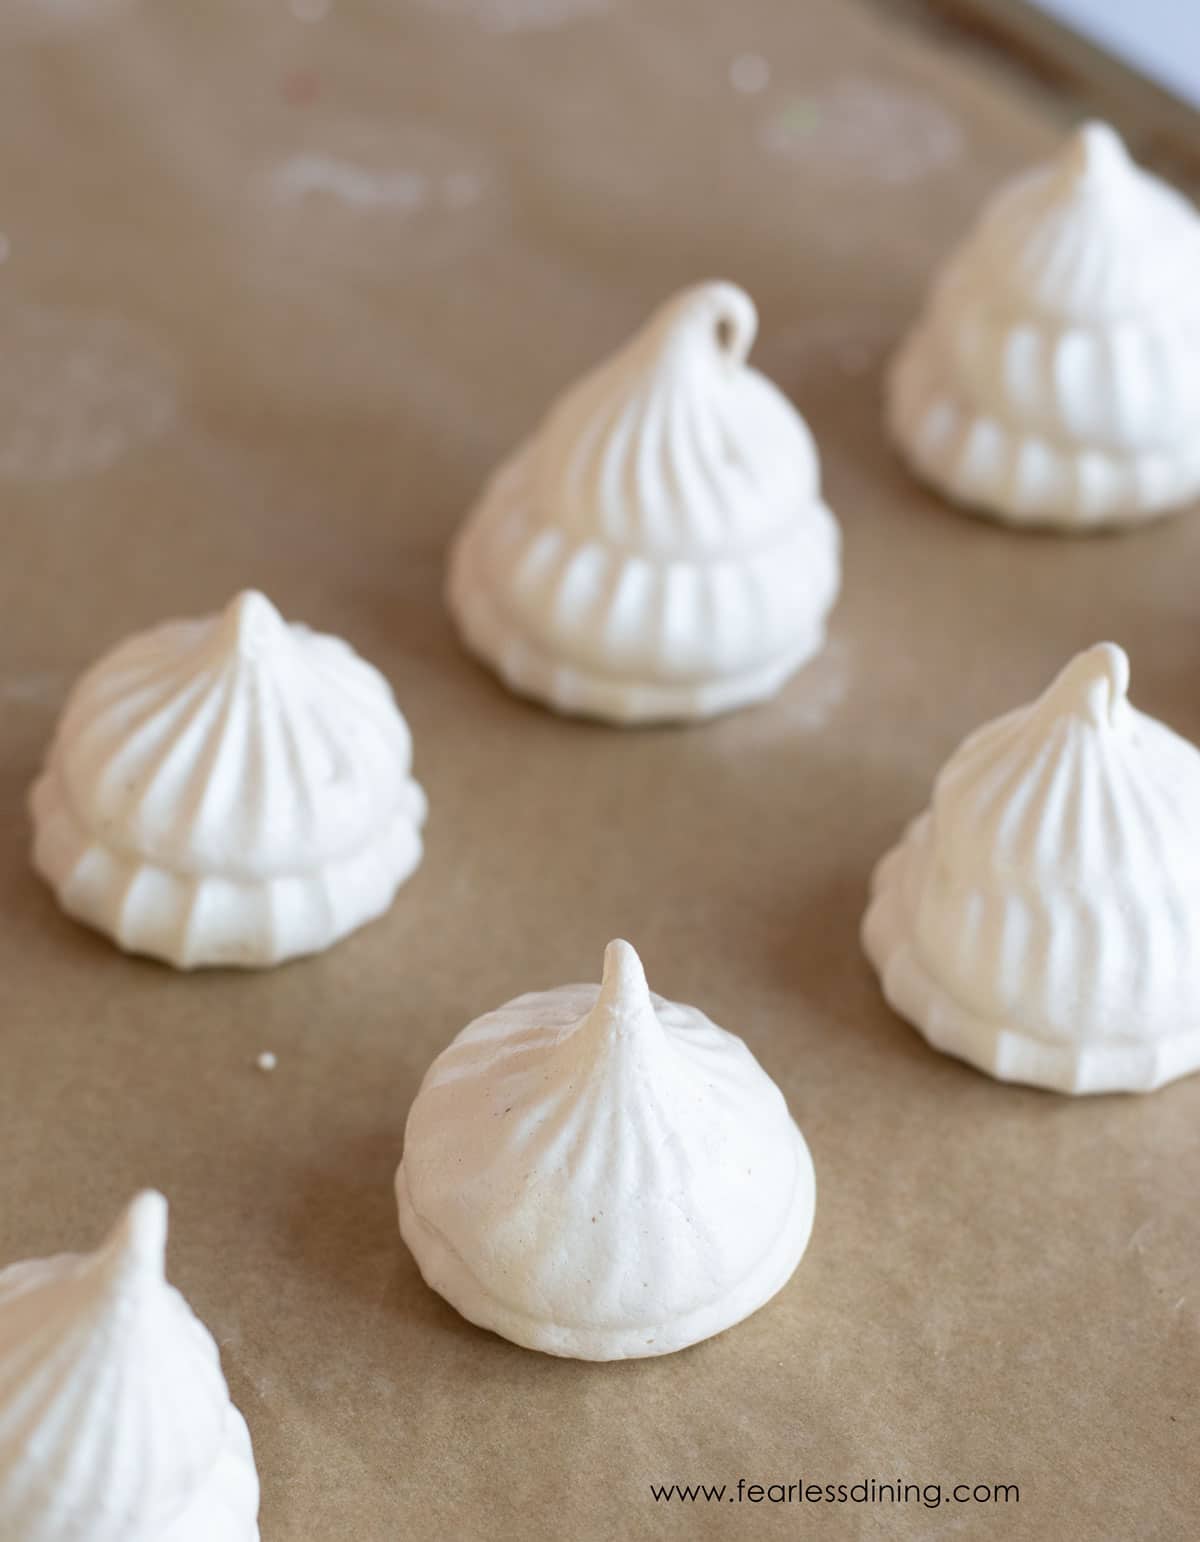 Meringues in rows on a baking sheet.